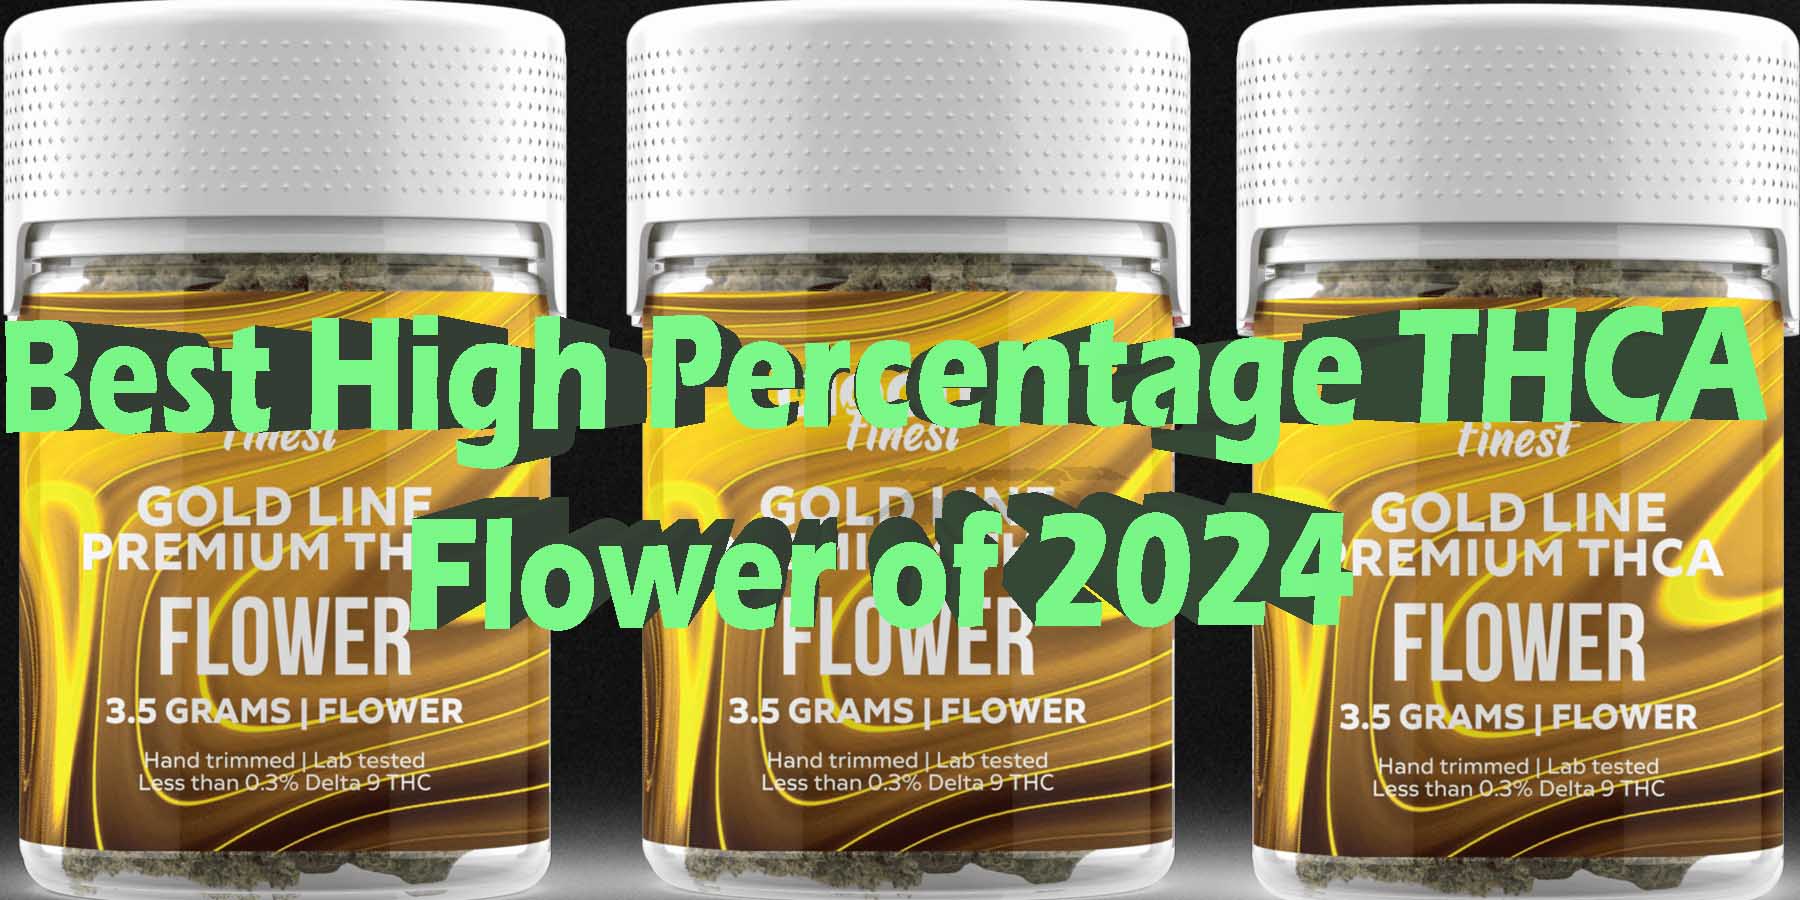 Best High Percentage THCA Flower of 2024 WhereToGet HowToGetNearMe BestPlace LowestPrice Coupon Discount For- Smoking Best High Smoke Shop Online Near Me Strongest Binoid Bloomz